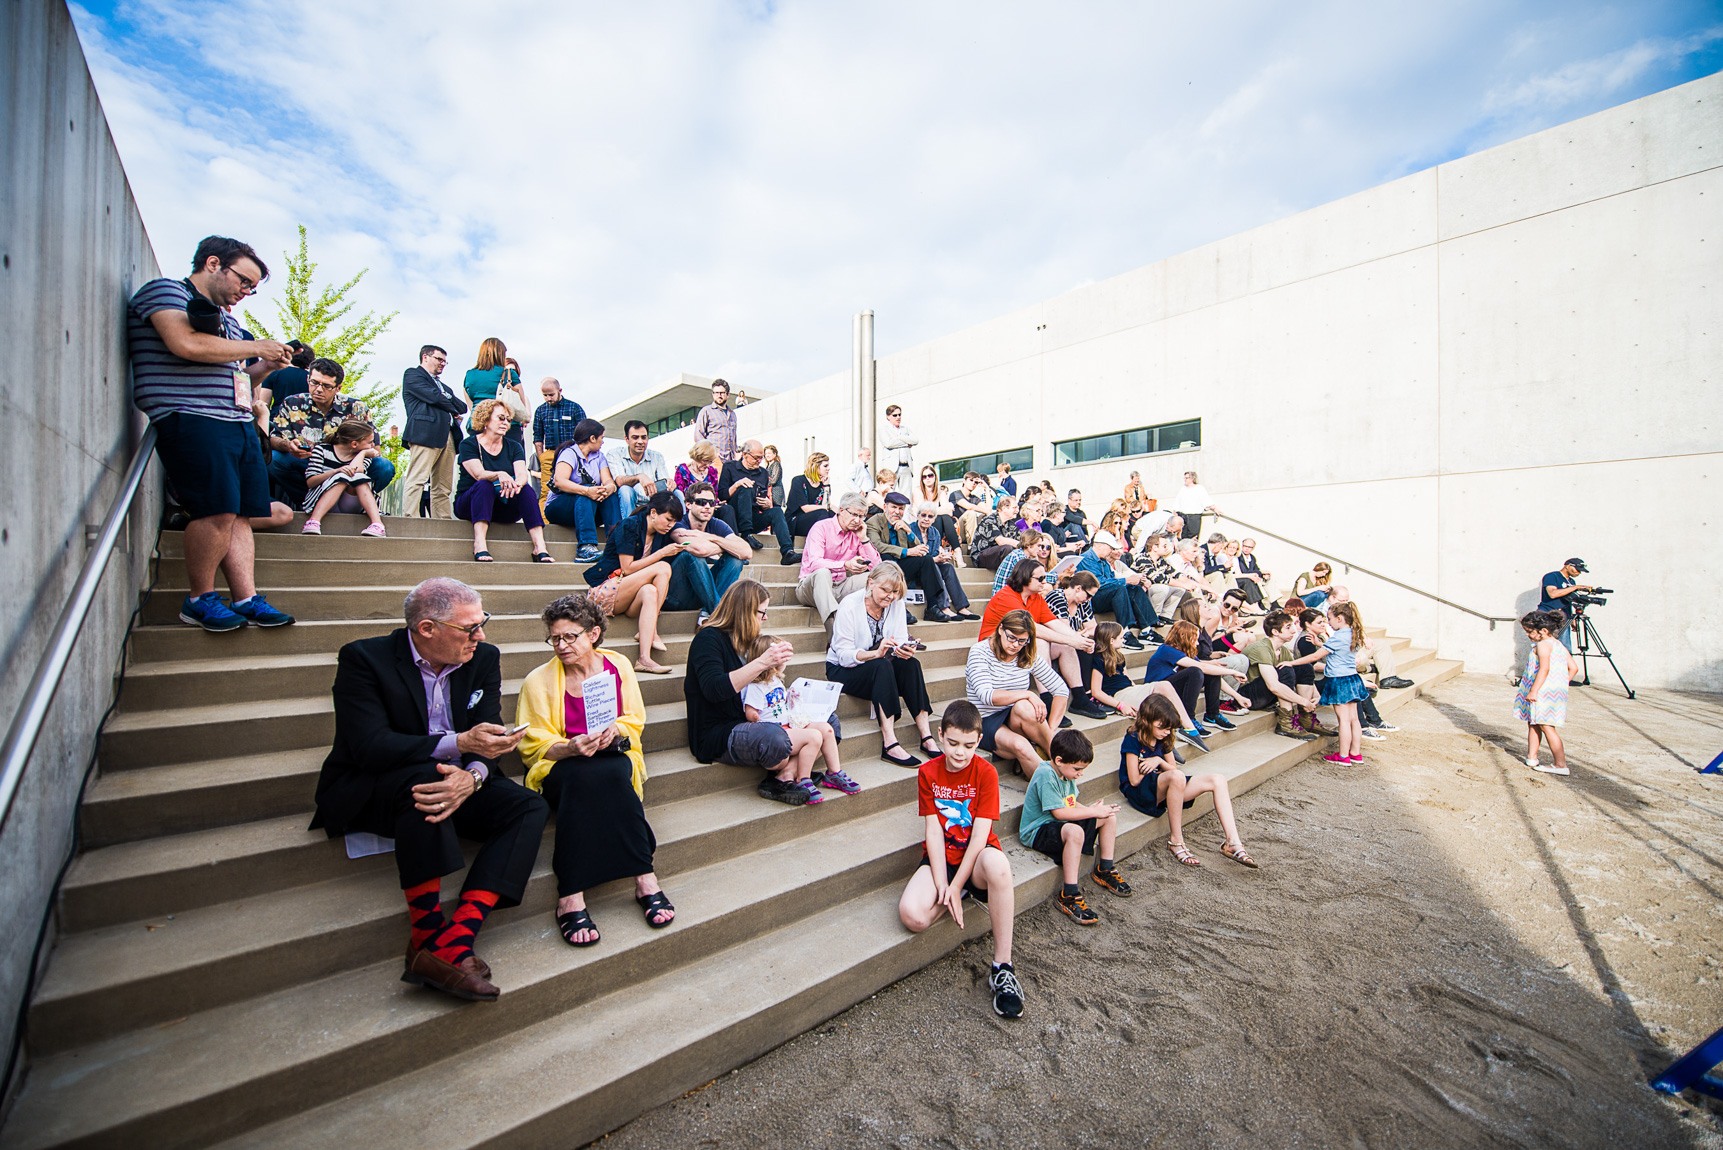 A large audience gathers on the Courtyard stairs to watch performers.